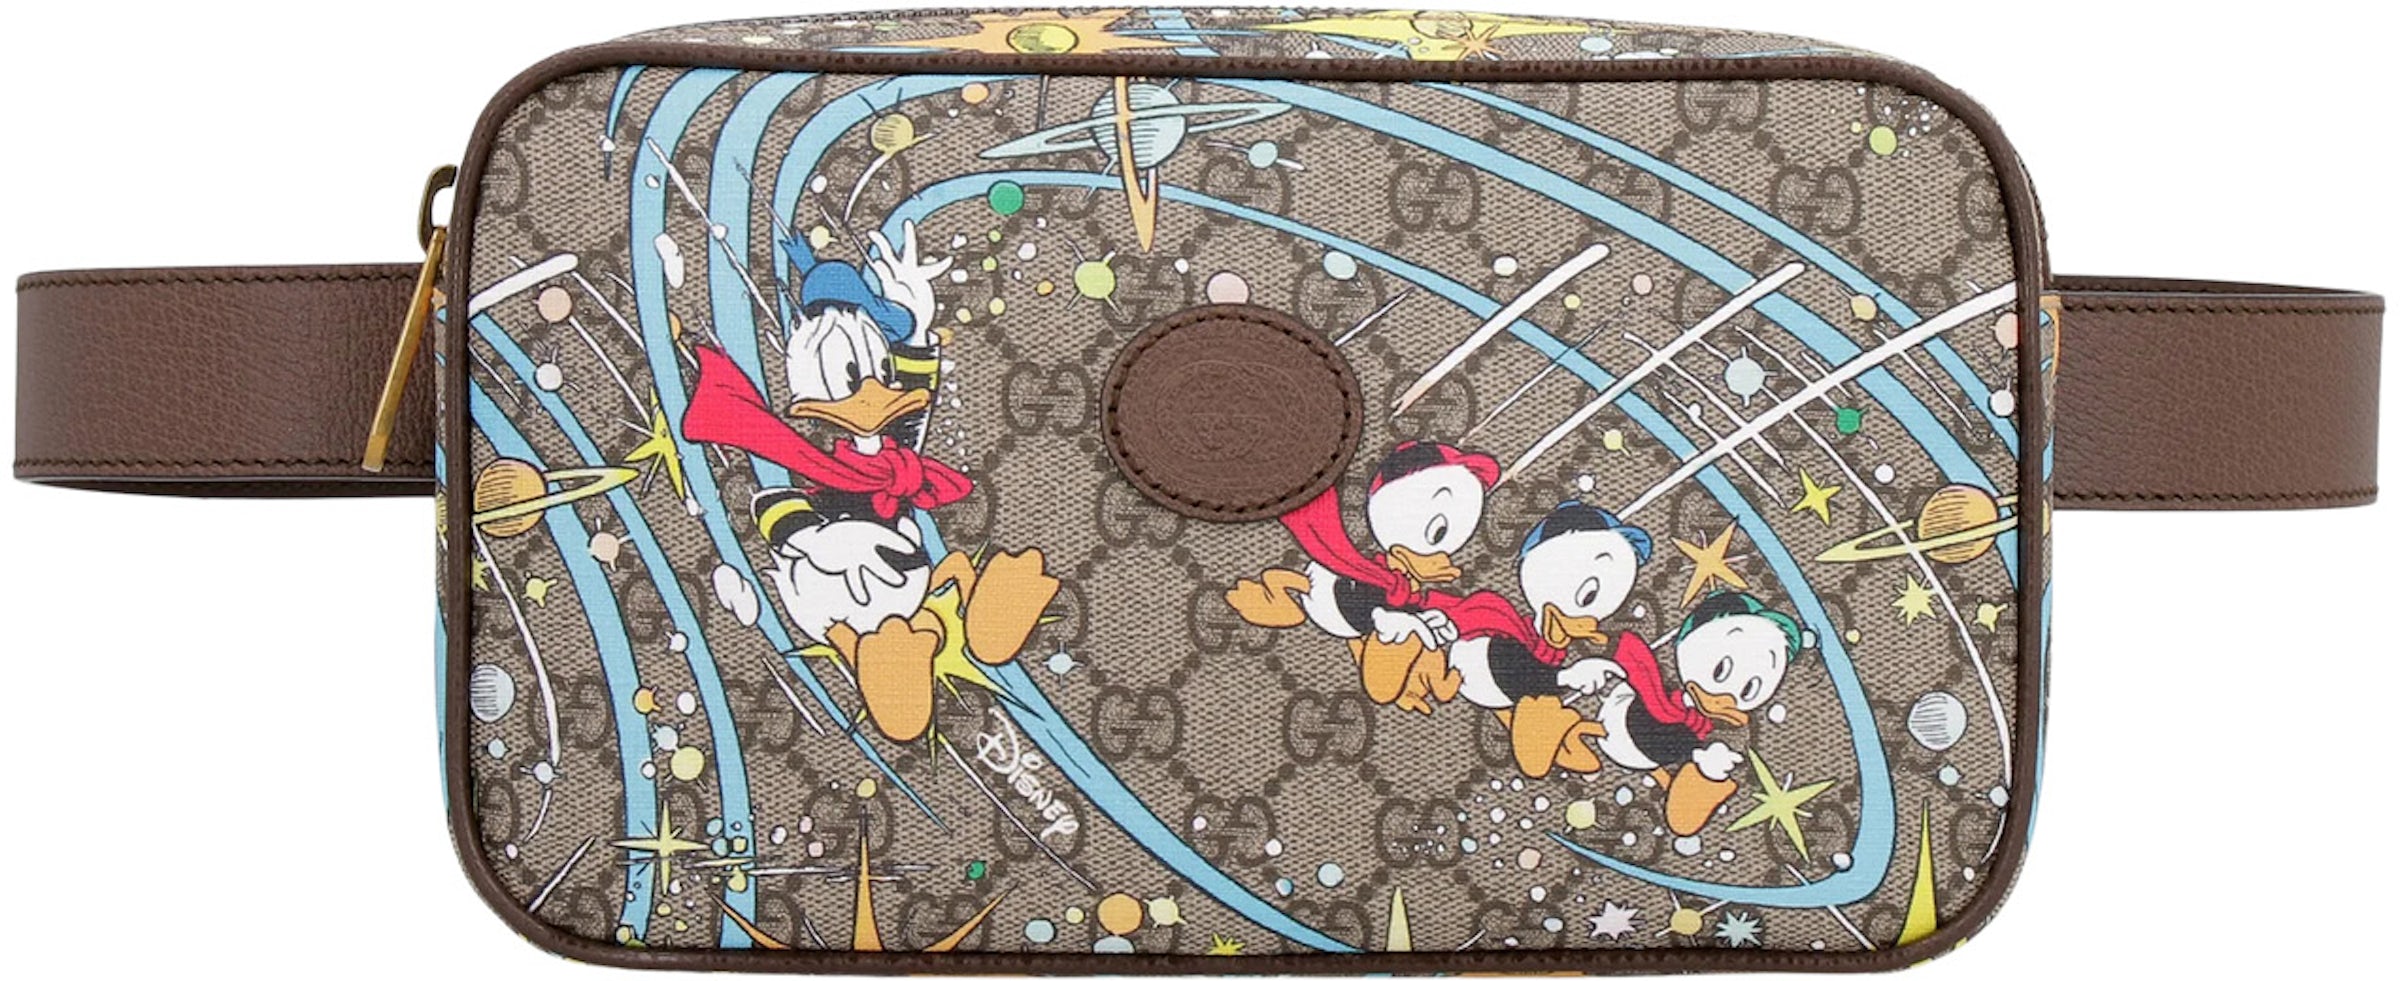 Gucci x Disney Donald Duck GG Supreme Belt Bag Beige/Ebony in Coated Canvas  with Gold-tone - US